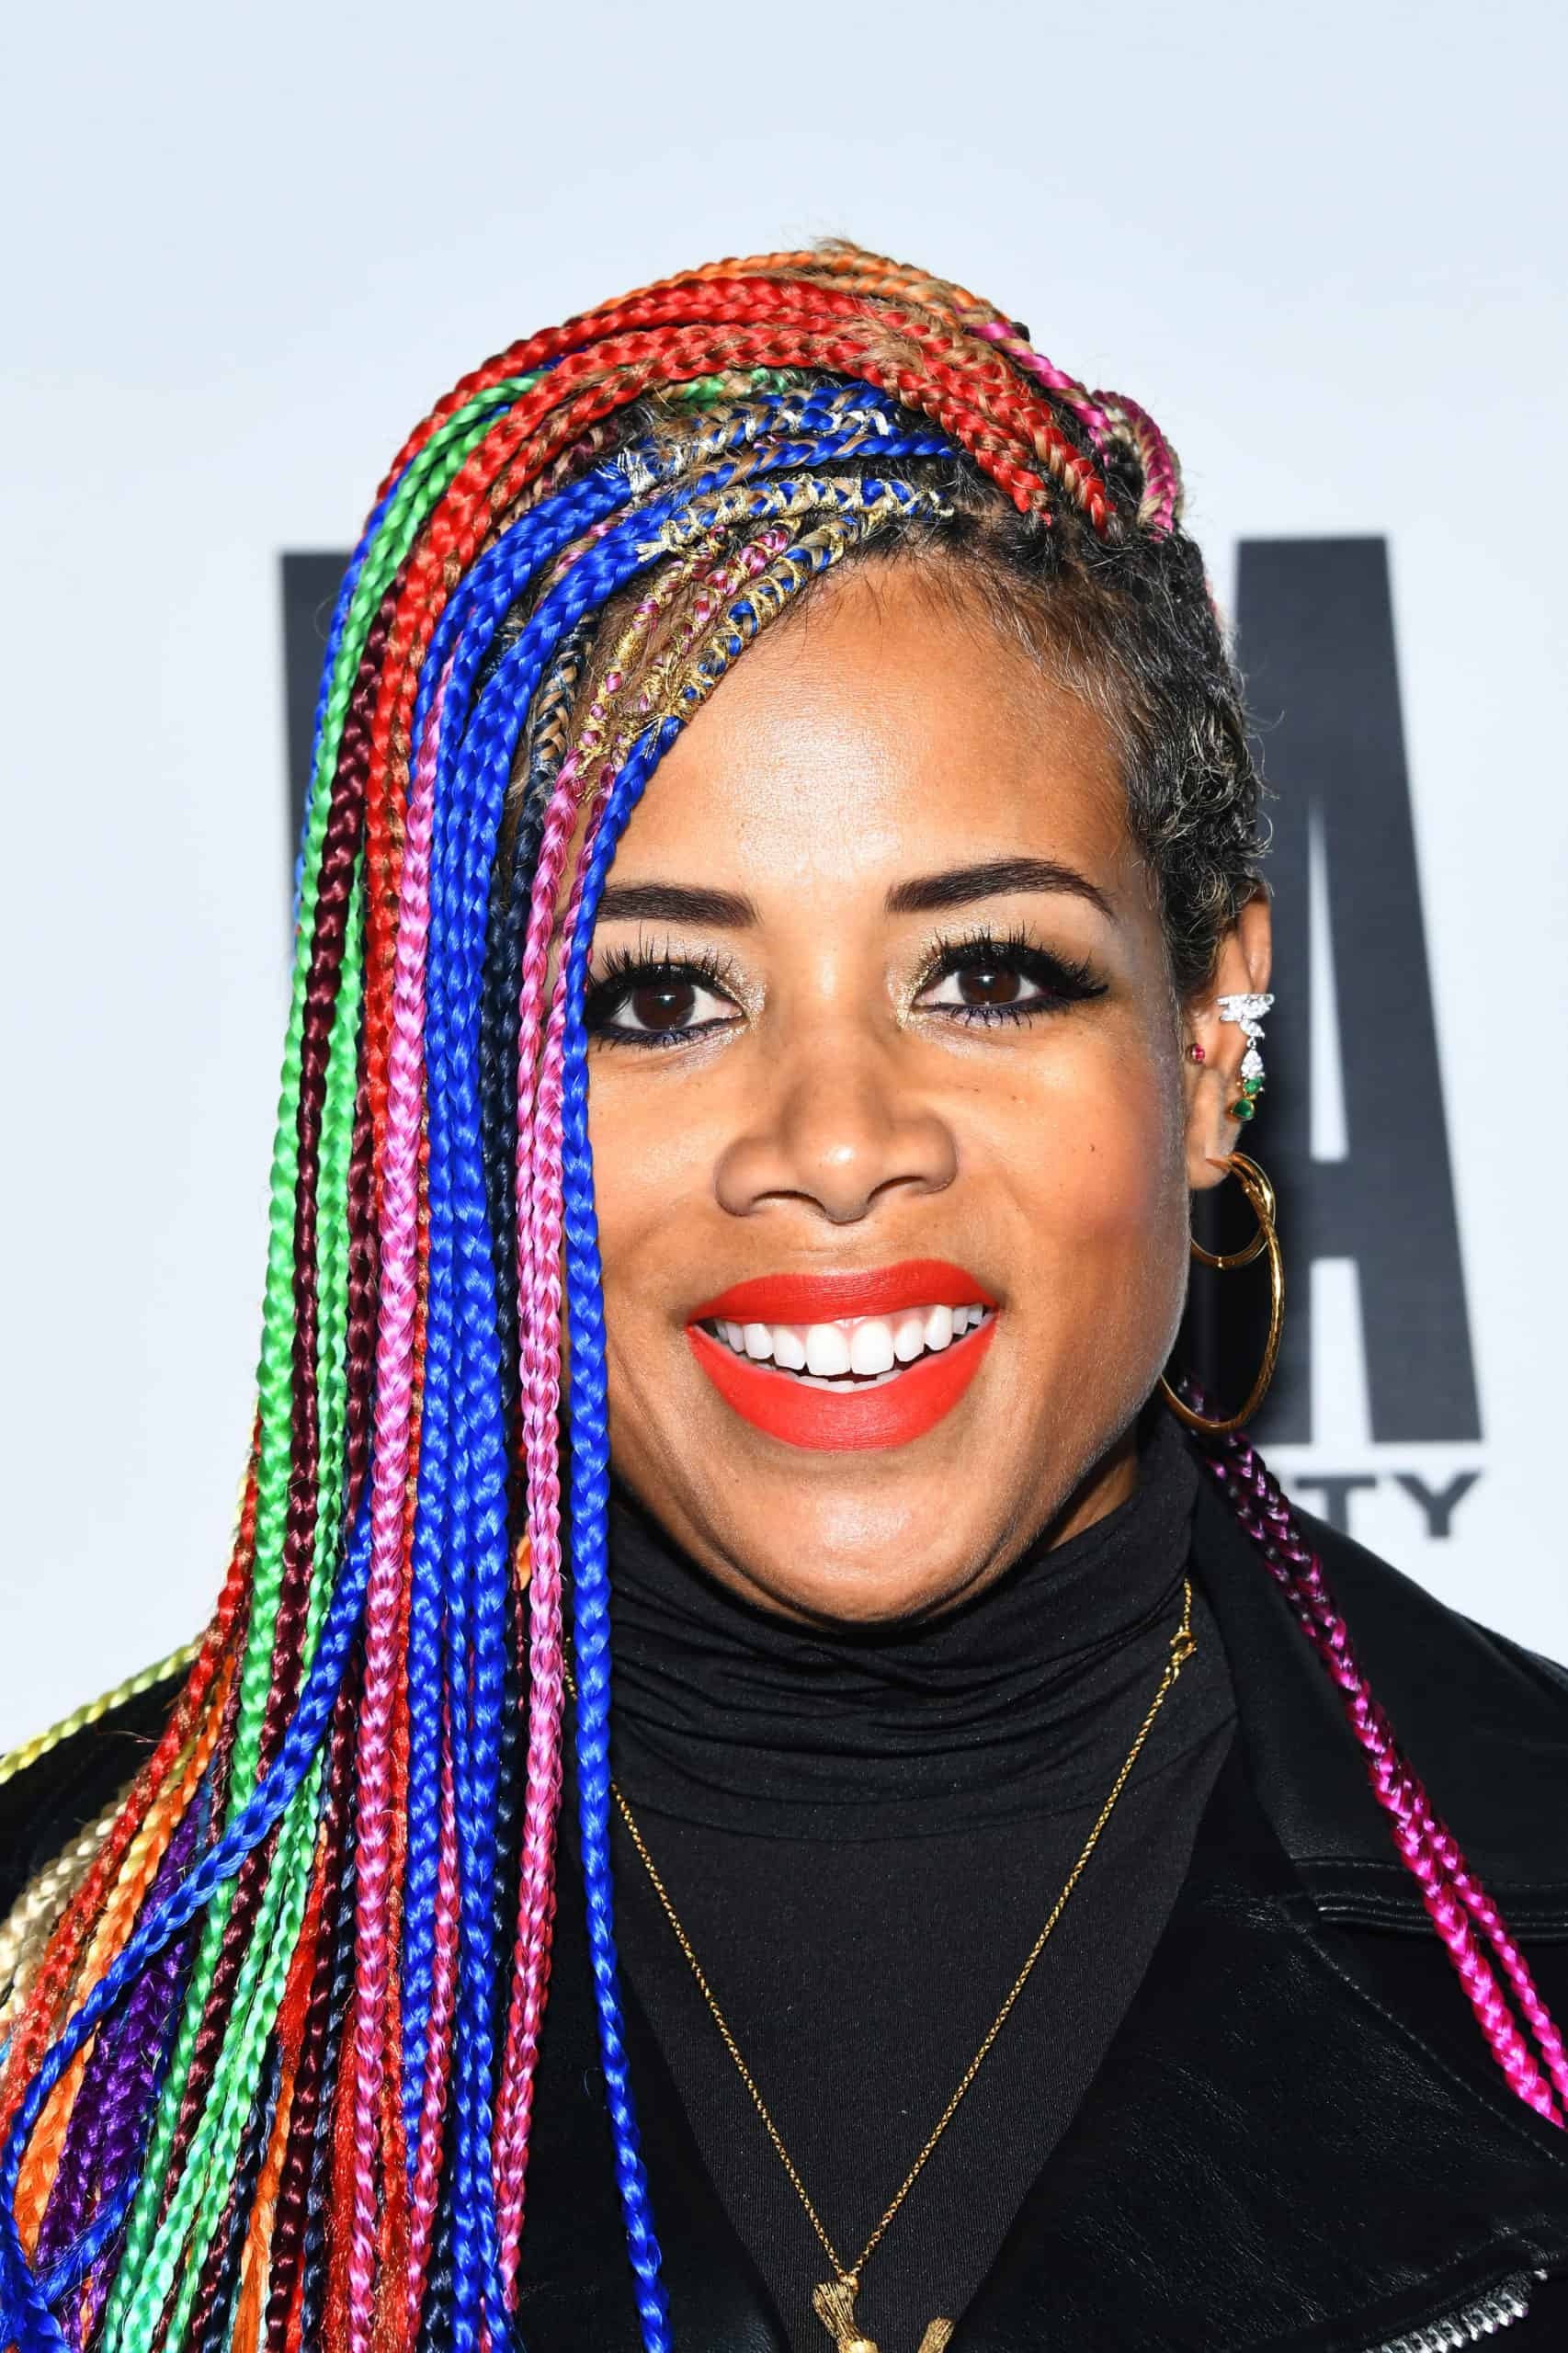 Kelis’ husband Mike Mora revealed that he had stage 4 gastric cancer and said he could only live for 18 months